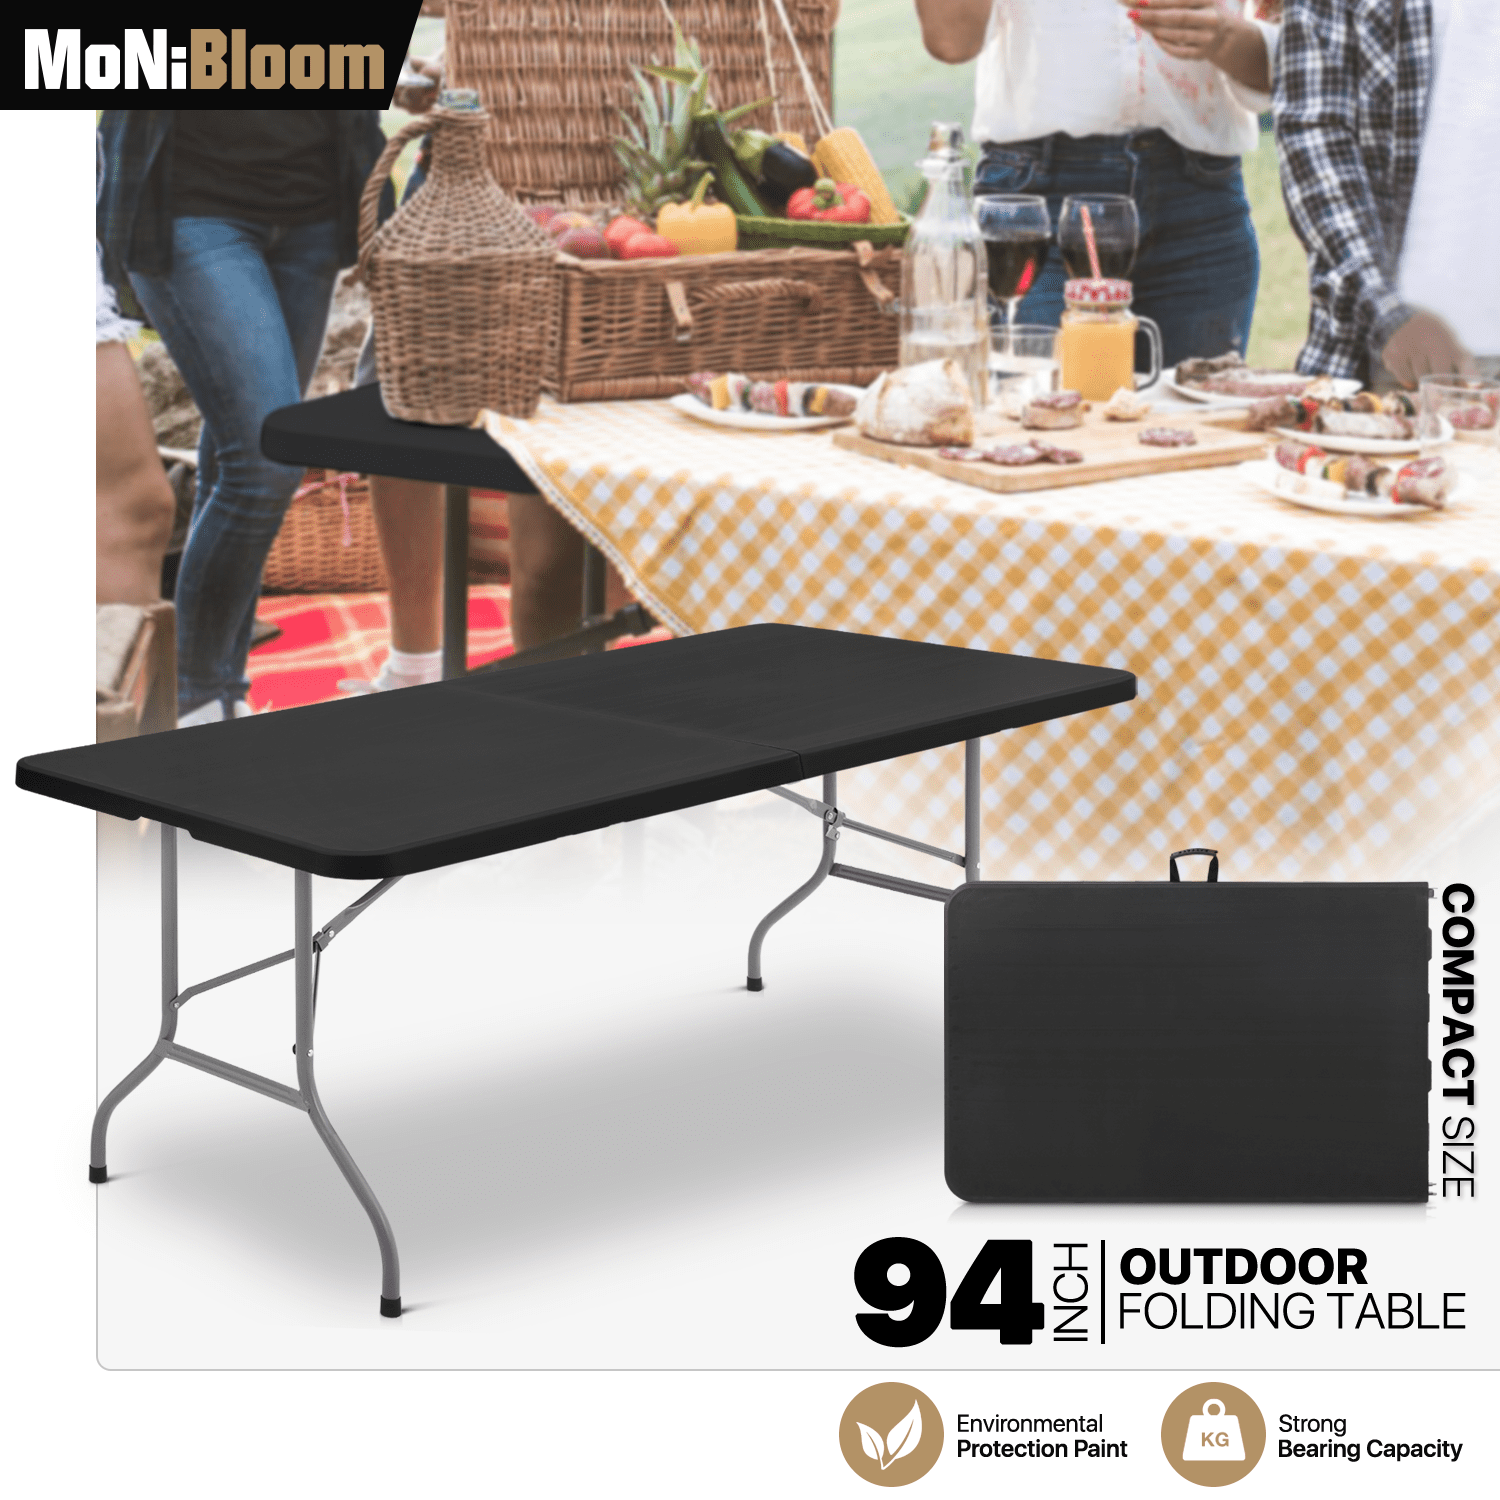 MoNiBloom 8FT Party Outdoor for Table Rectangle Outdoor Carrying Black Desk Plastic BBQ Camping with Dining Camping Folding Table Handle